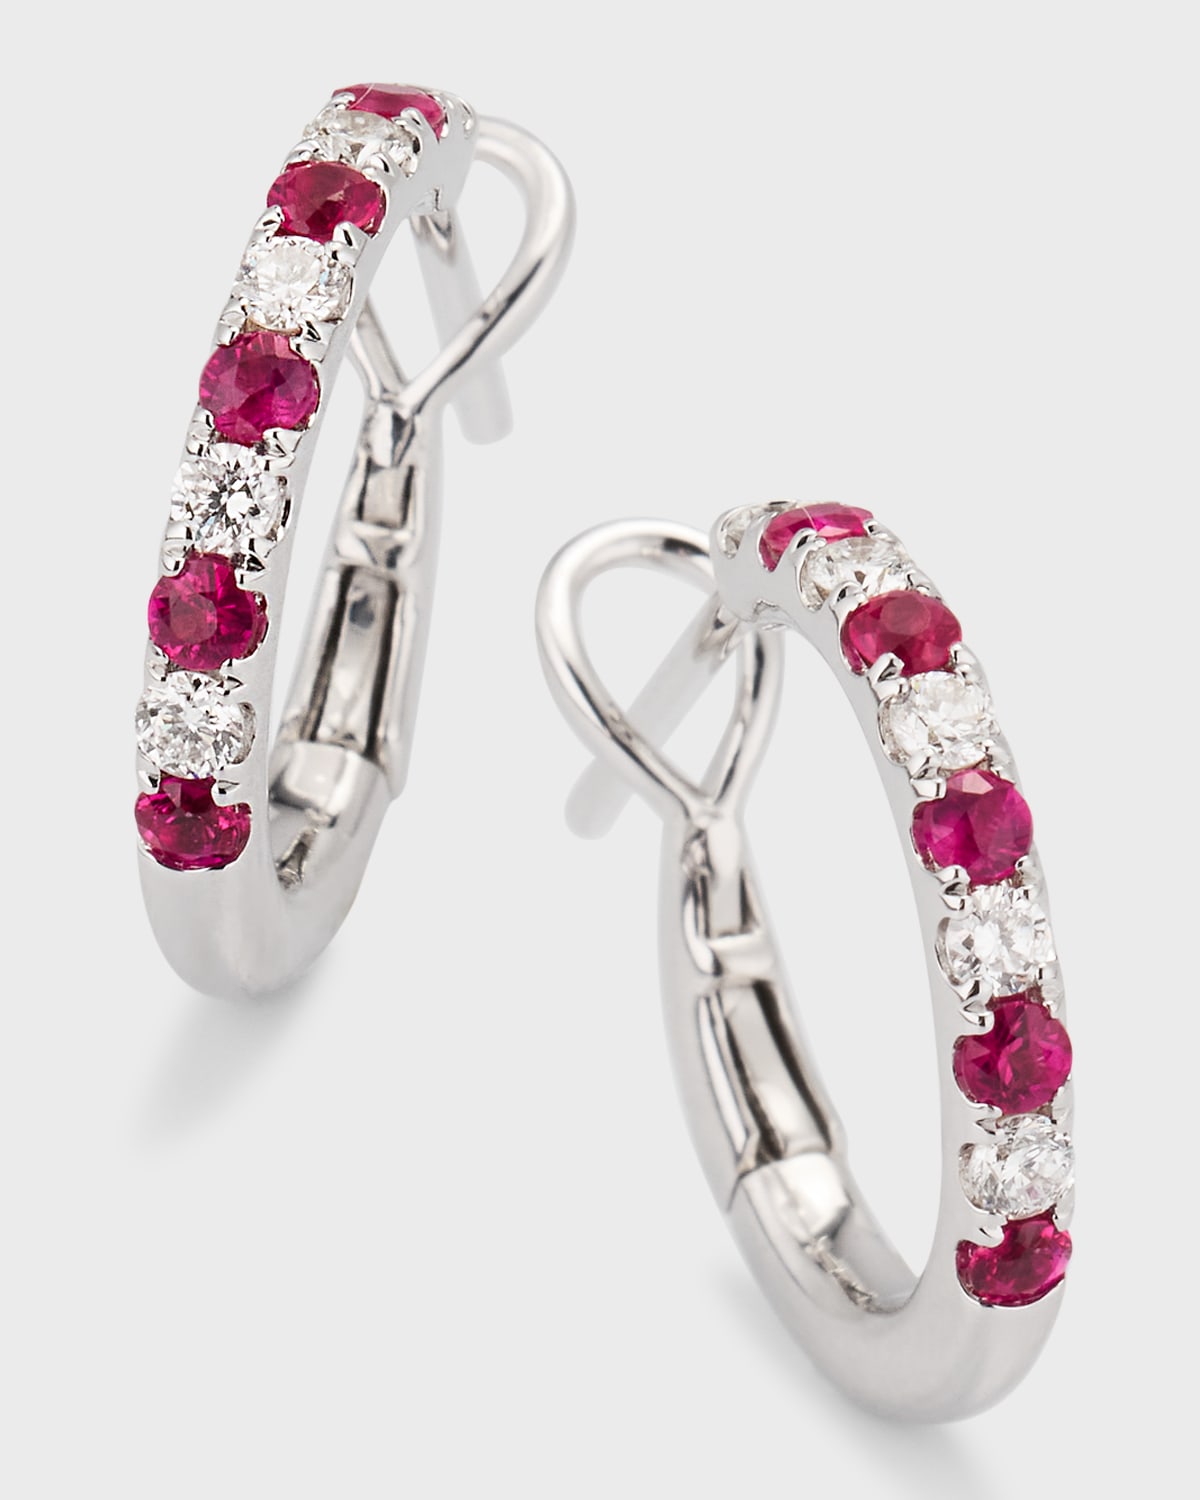 Frederic Sage Small Alternating Diamond And Ruby Hoop Earrings